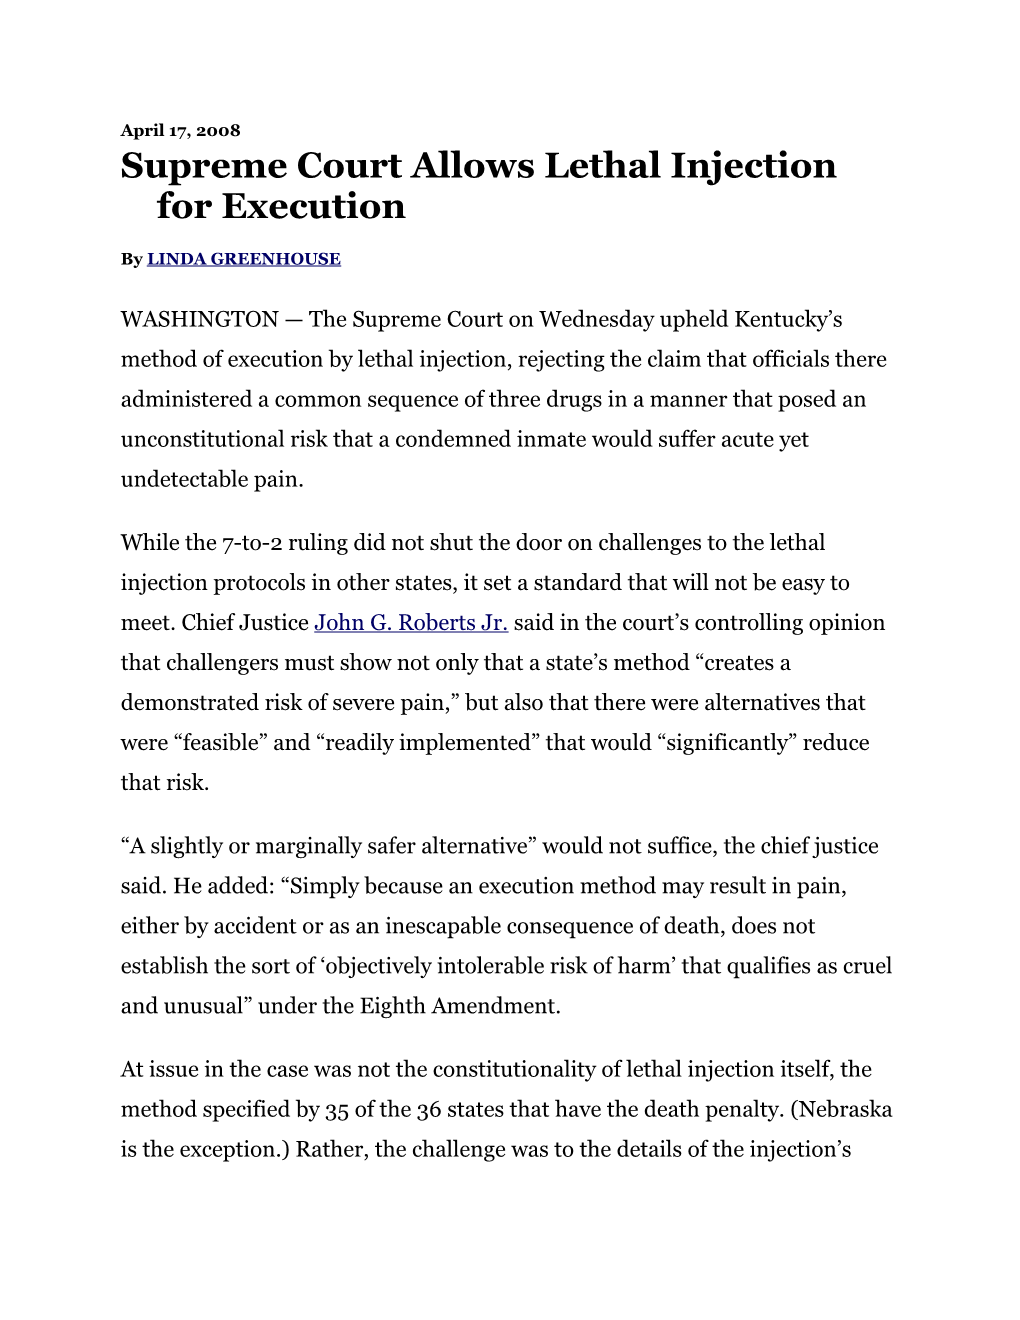 Supreme Court Allows Lethal Injection for Execution